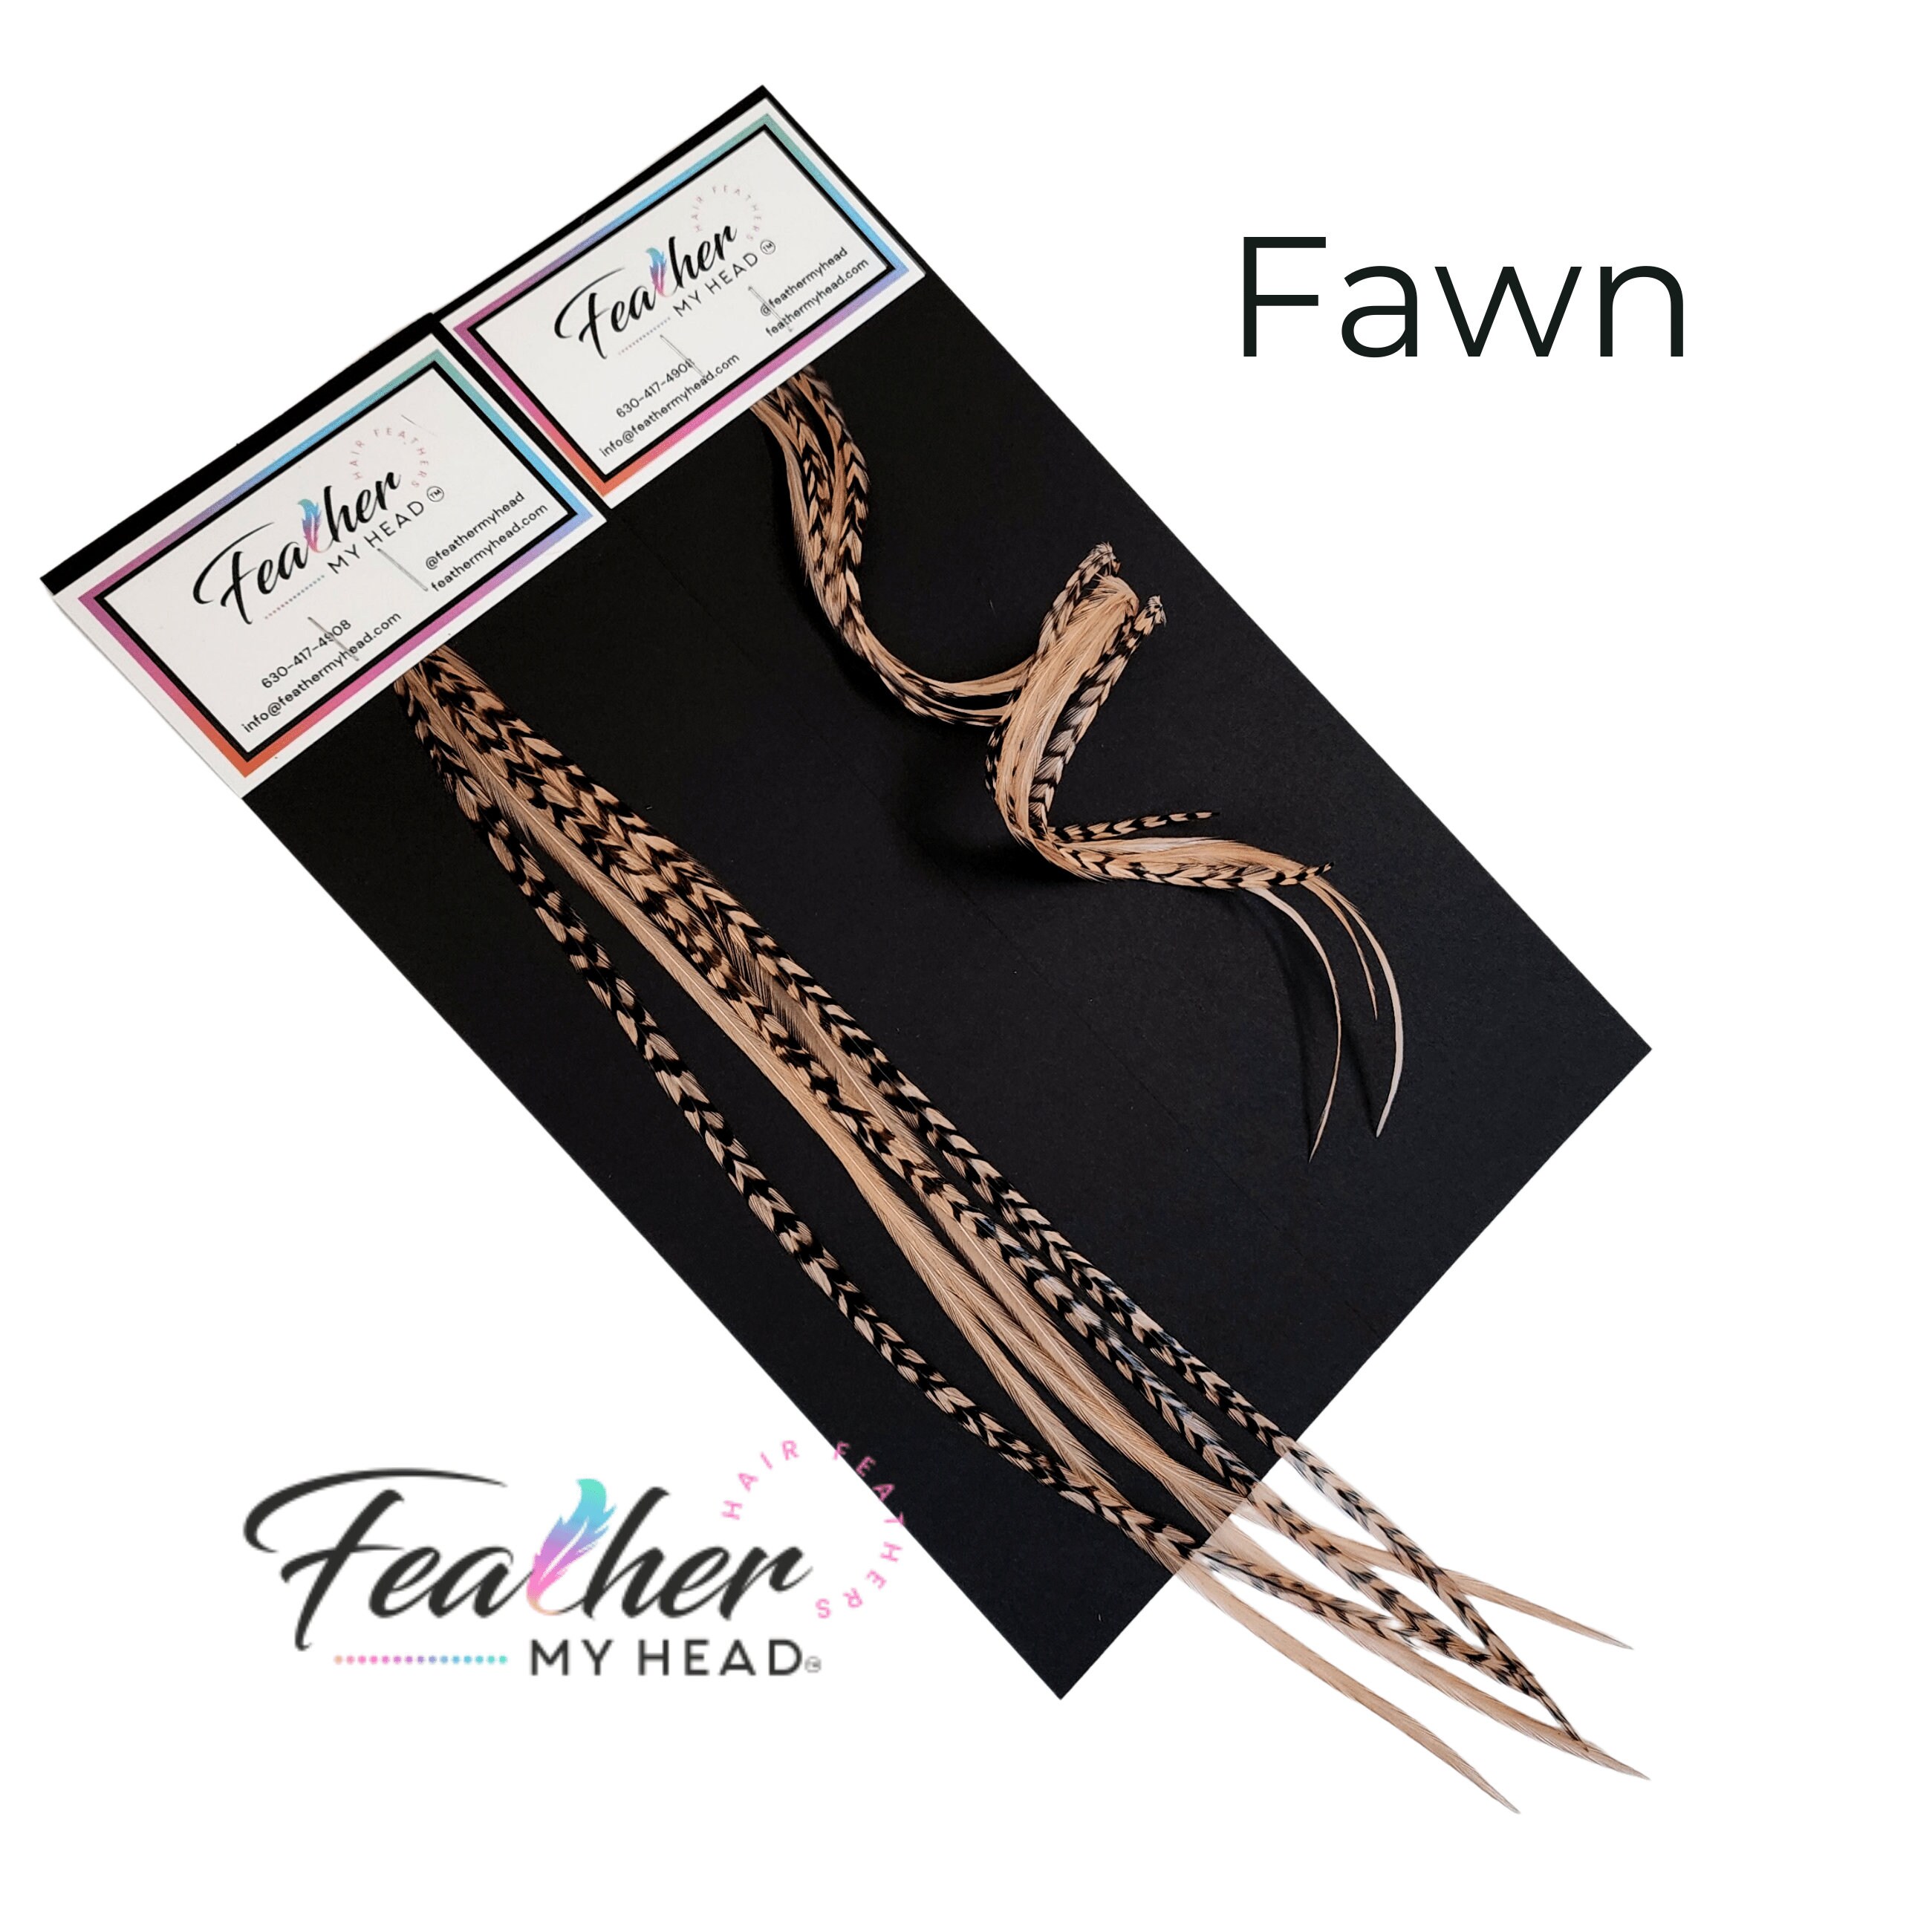 Tan Fannies Hair Feather Extensions